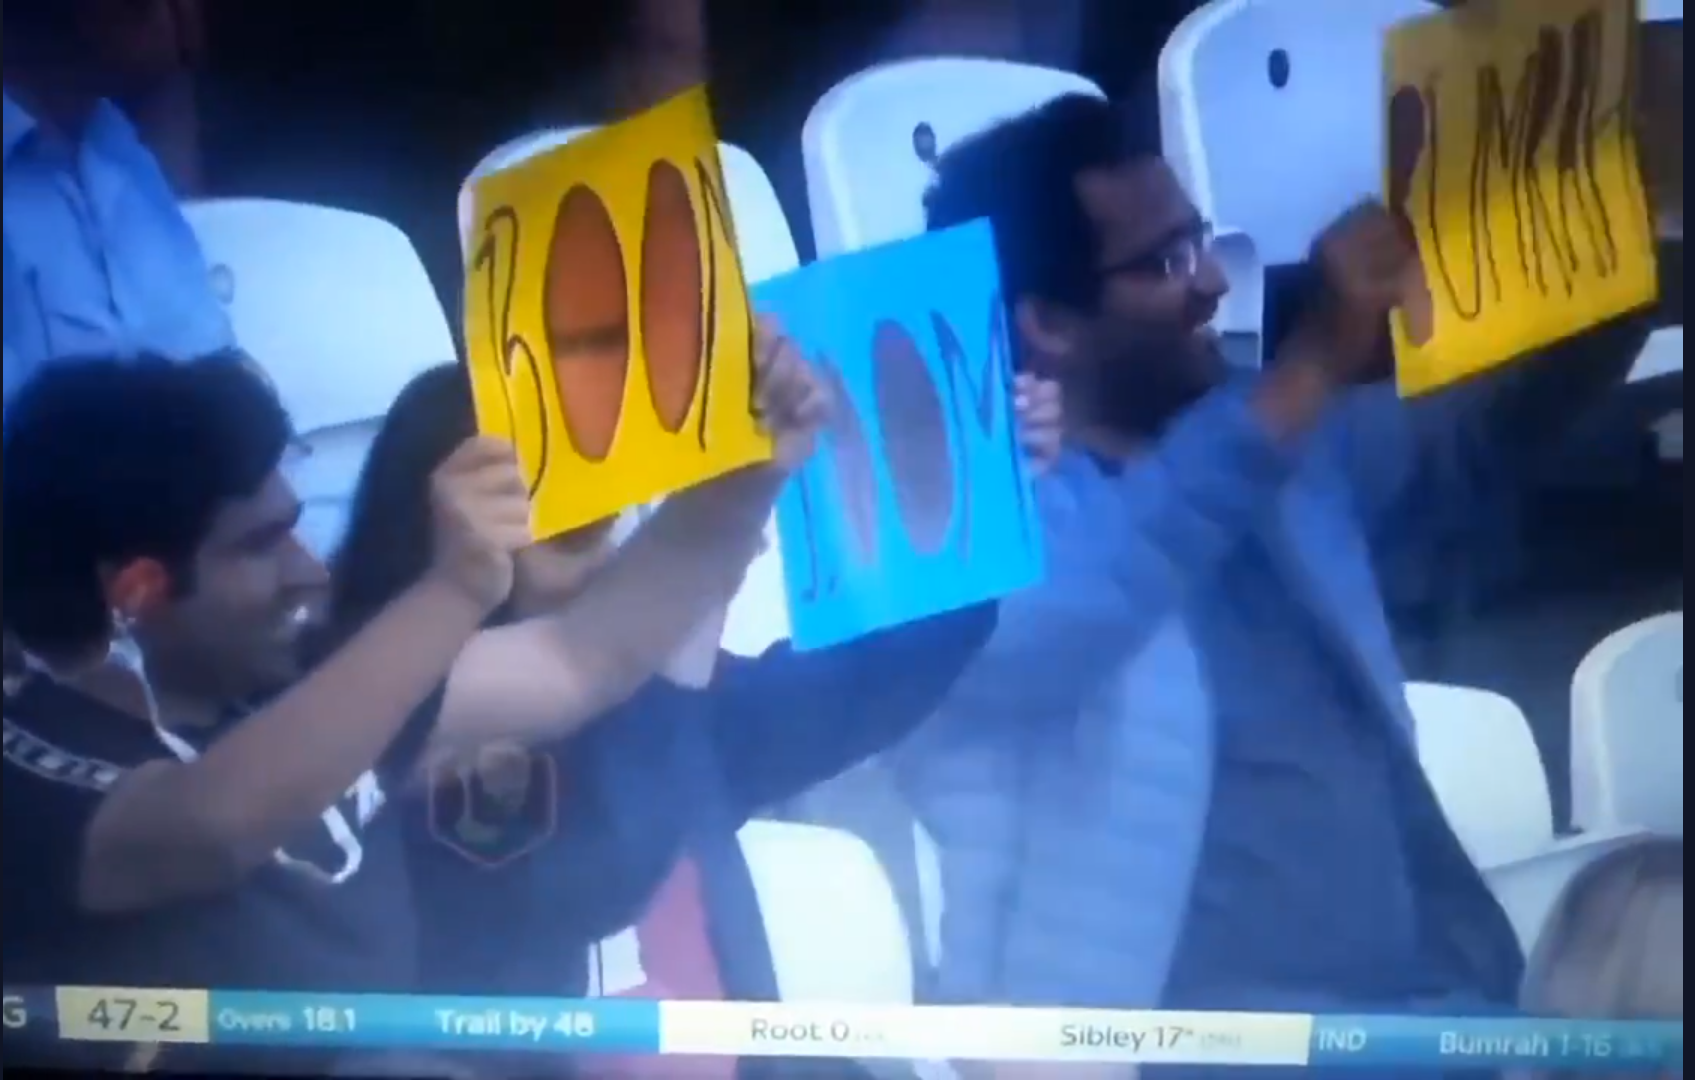 “Boom Boom Is Usually Shahid Afridi” – Michael Holding Reacts To “Boom Boom Bumrah” Placard